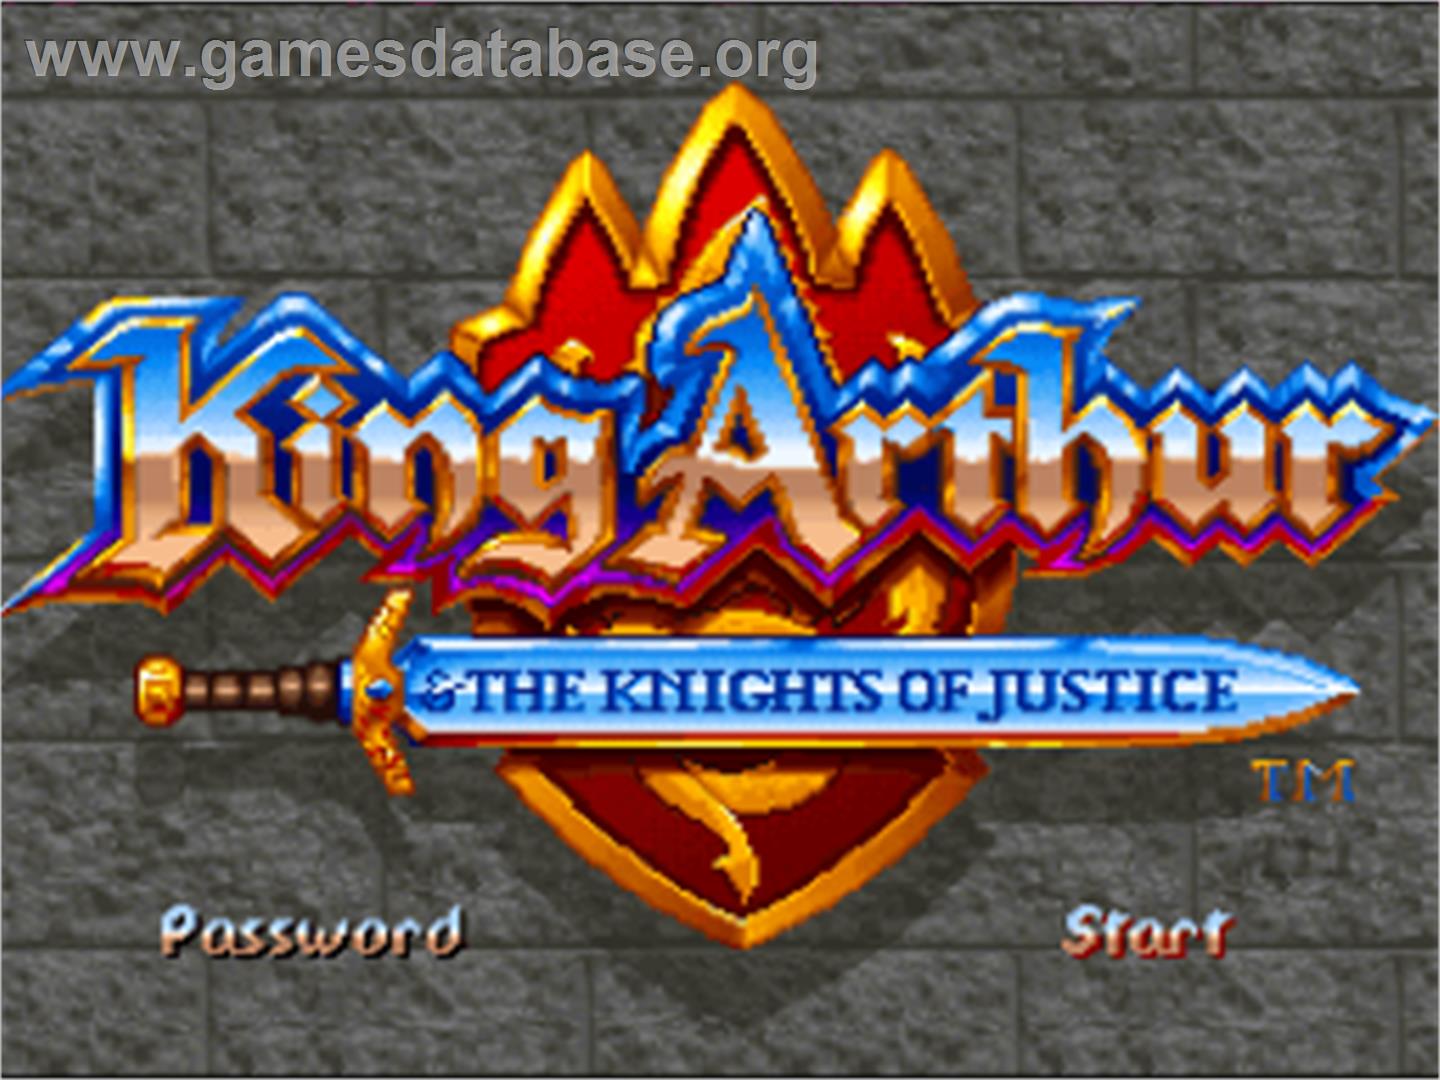 King Arthur & the Knights of Justice - Nintendo SNES - Artwork - Title Screen